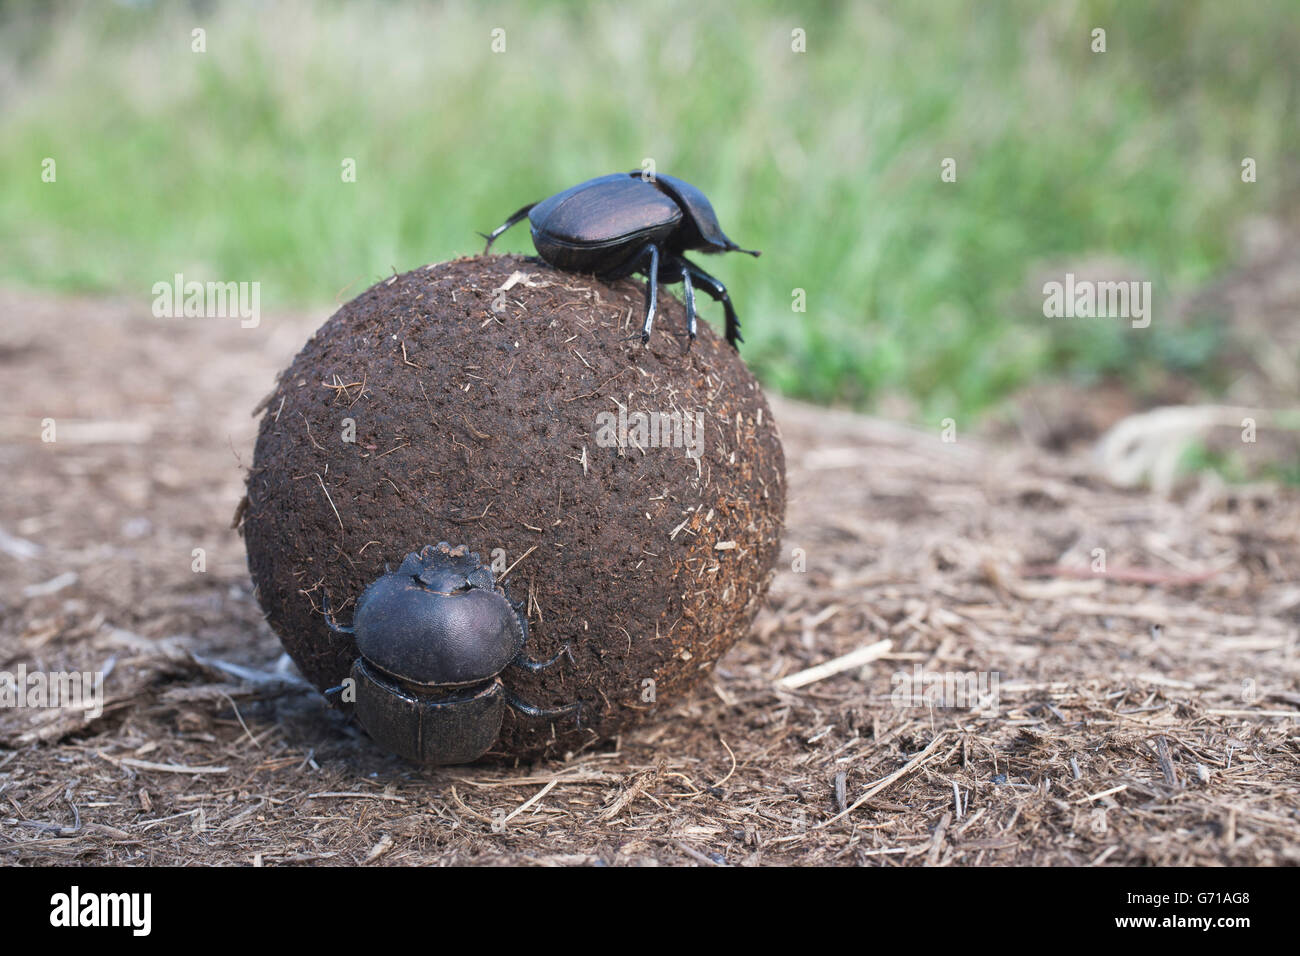 Dung Beetles, rolling ball of dung, Umfolozi-Hluhluwe National Park, South Africa / (Scarabaeus spec.) Stock Photo